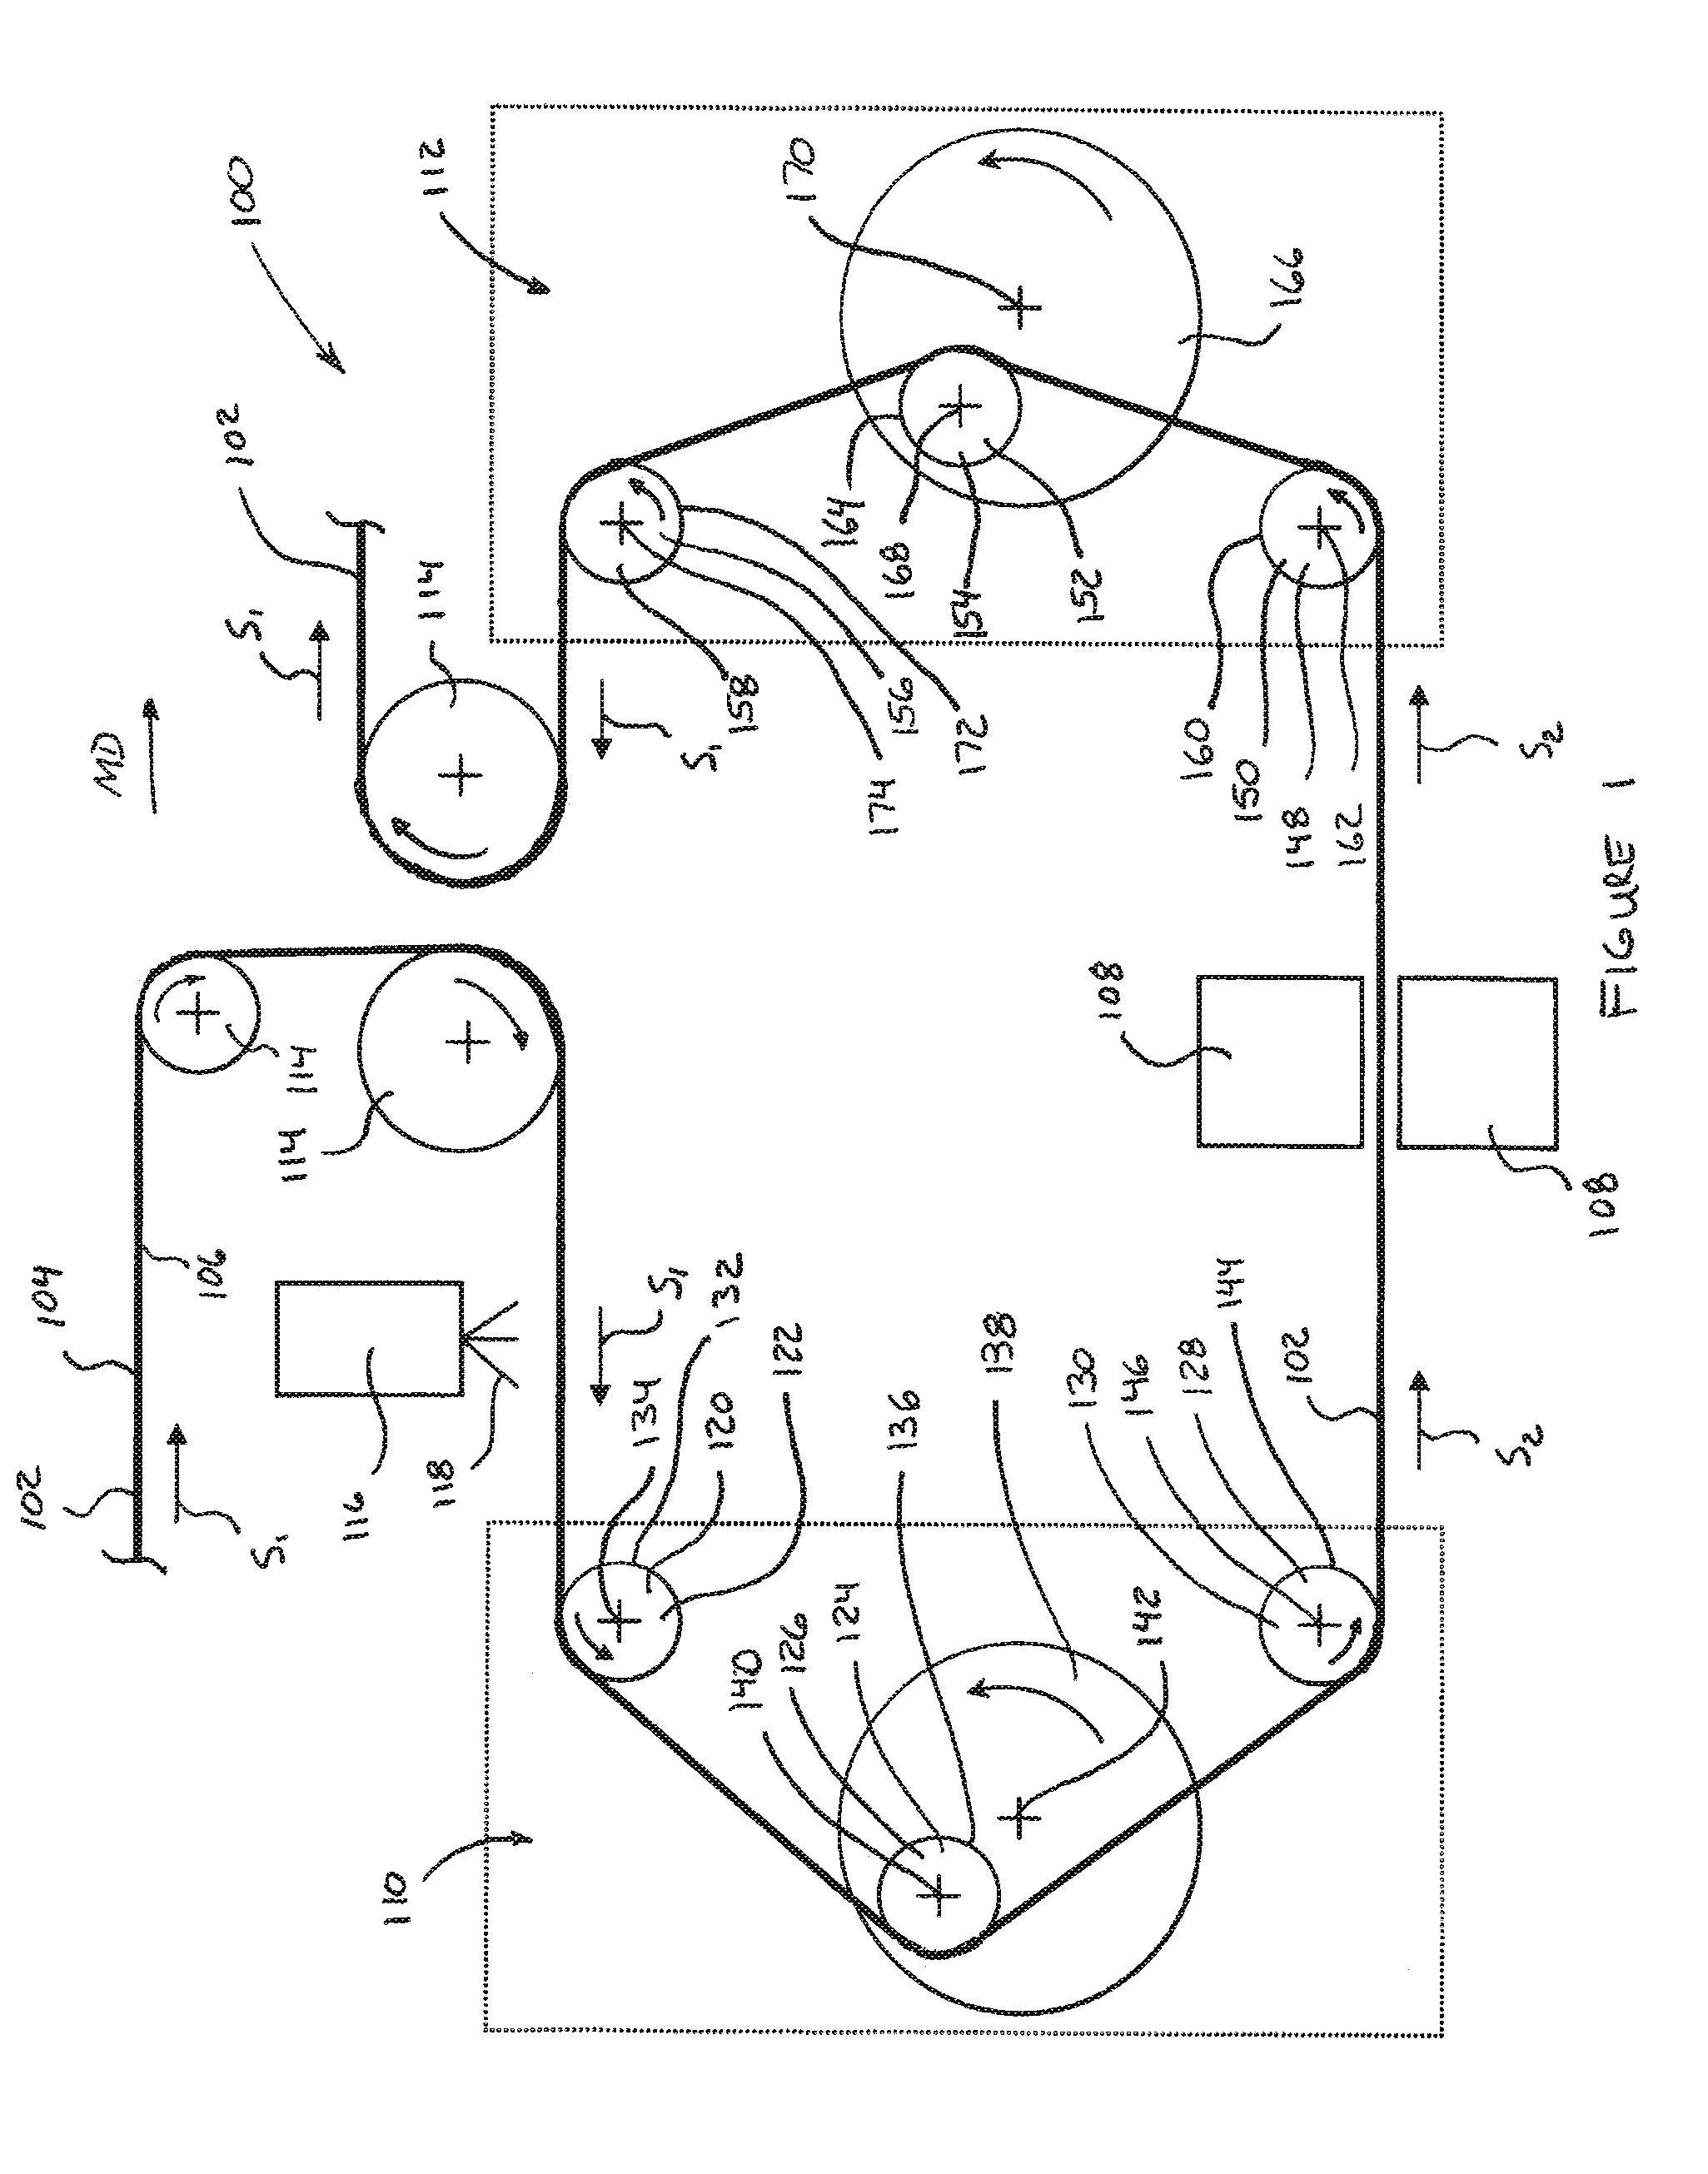 Appraratus and method for providing a localized speed variance of an advancing substrate